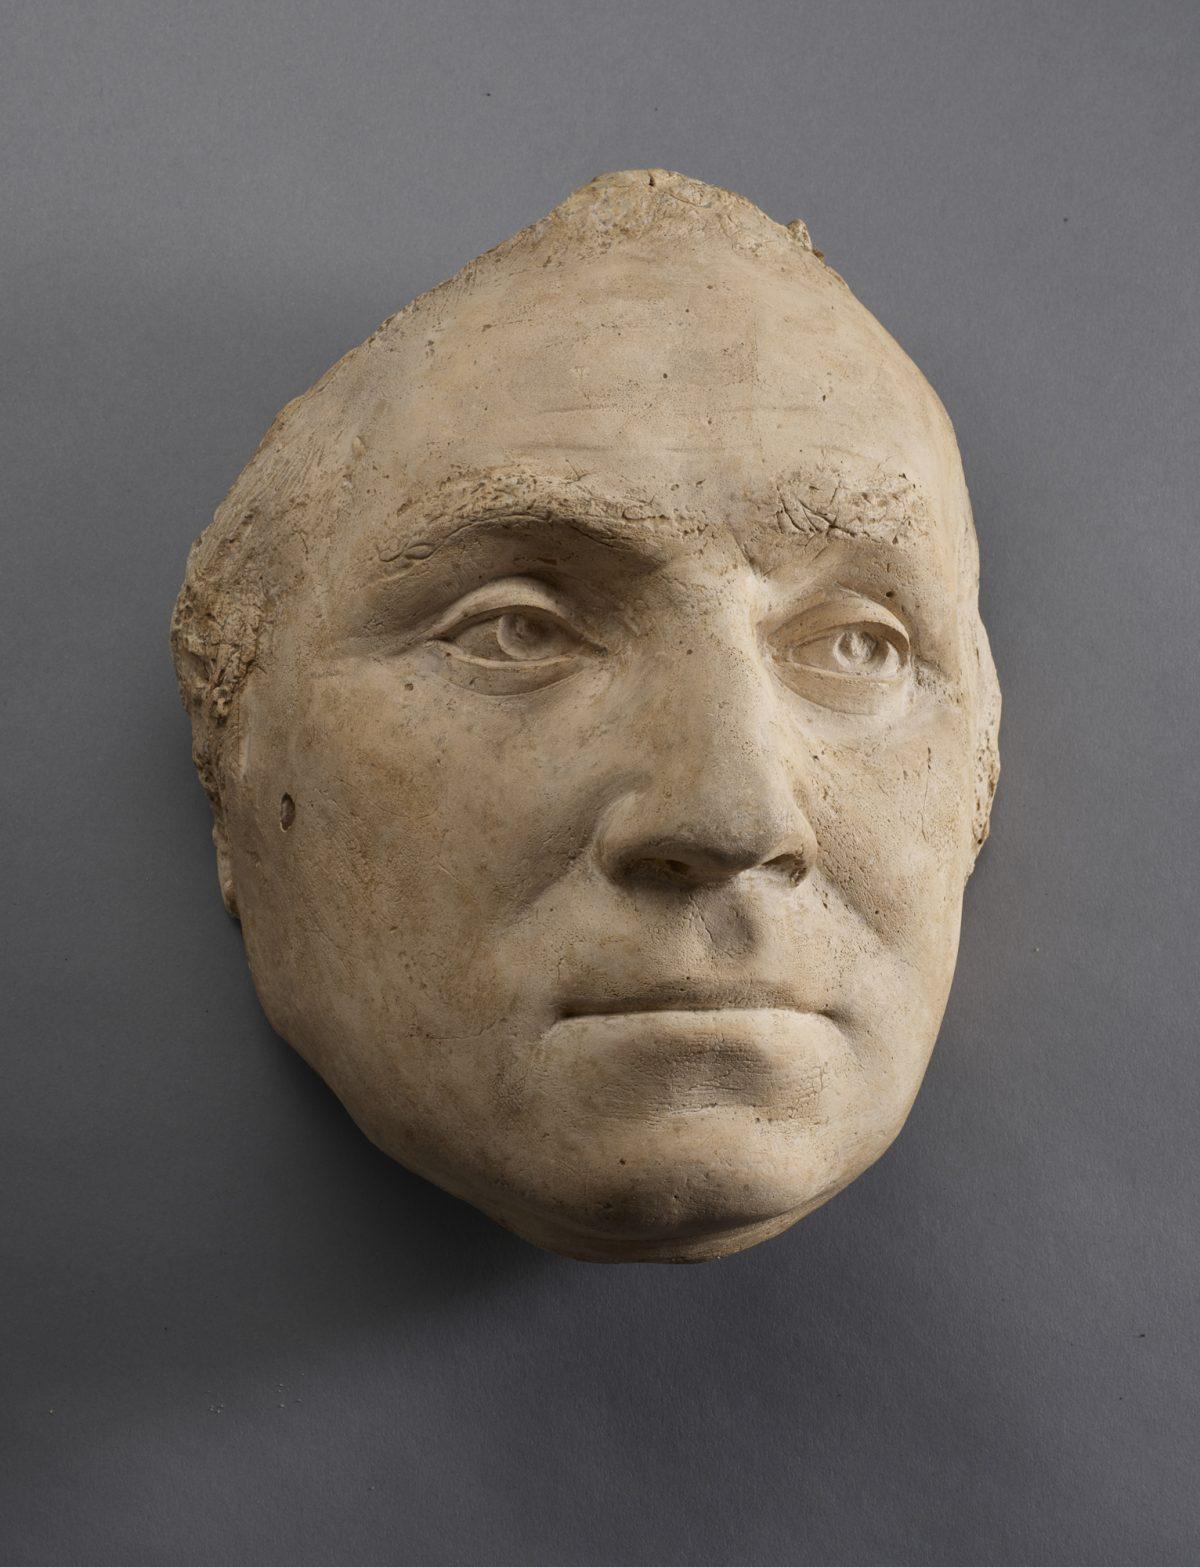 "Life Mask of George Washington," 1785, by Jean-Antoine Houdon (1741–1828). Plaster,<br/>height 12 1/2 inches, The Morgan Library & Museum, gift of J. P. Morgan Jr., 1924. (The Pierpont Morgan Library)